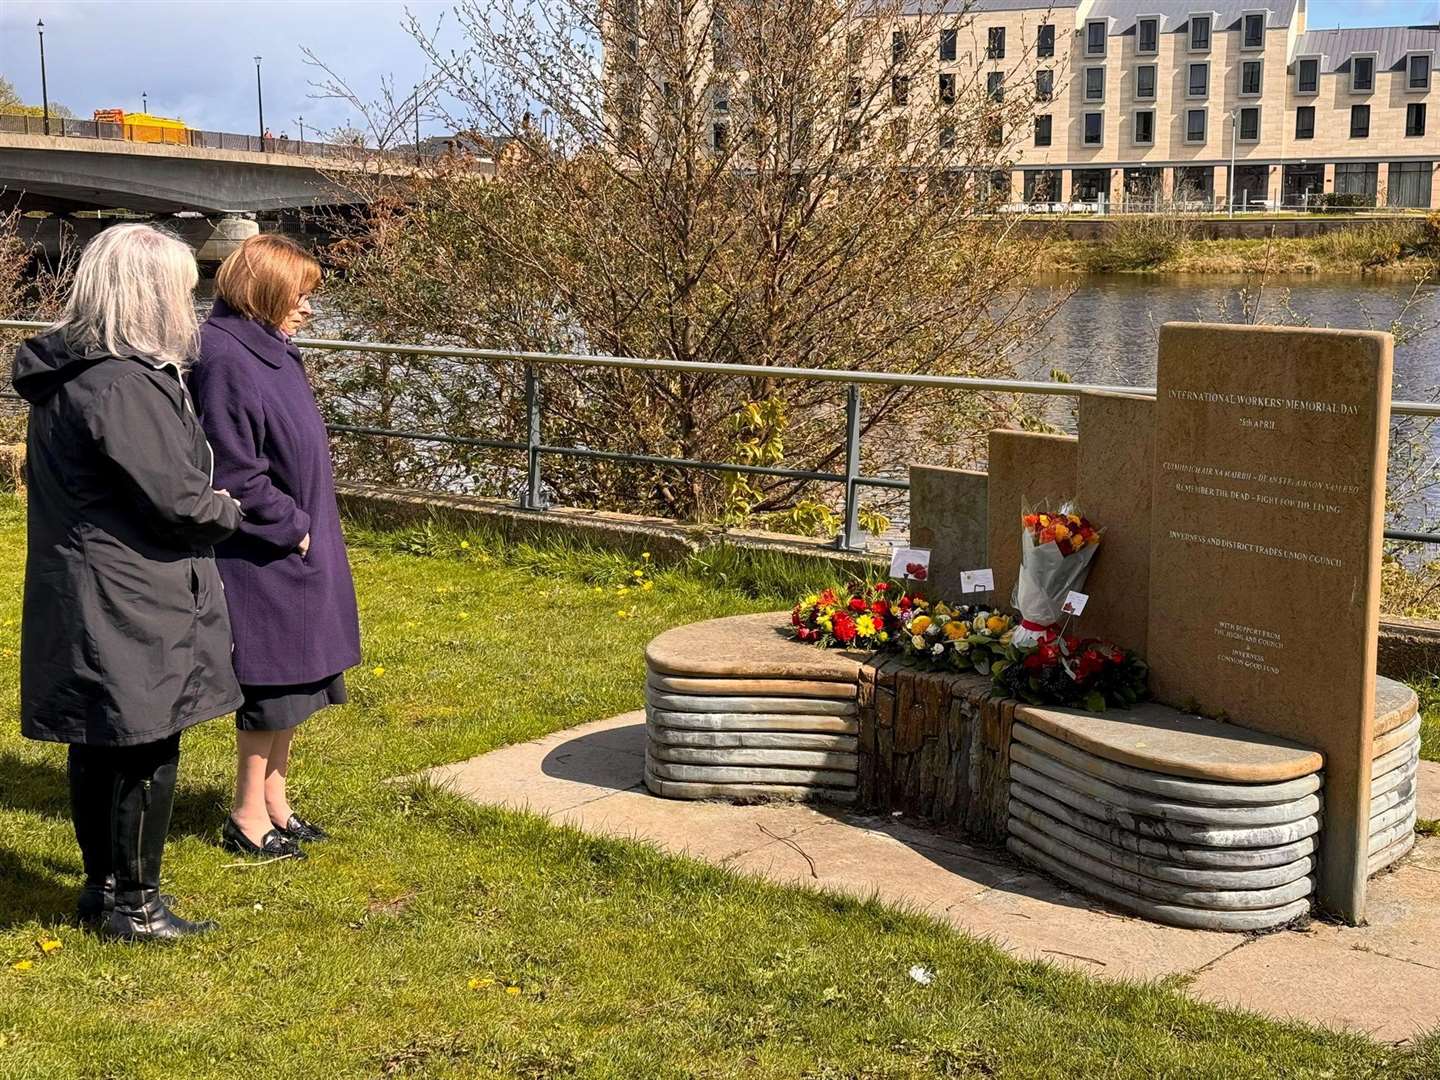 Rhoda Grant MSP was joined by Cllr Bet McAllister as flowers and wreaths were laid at the memorial.